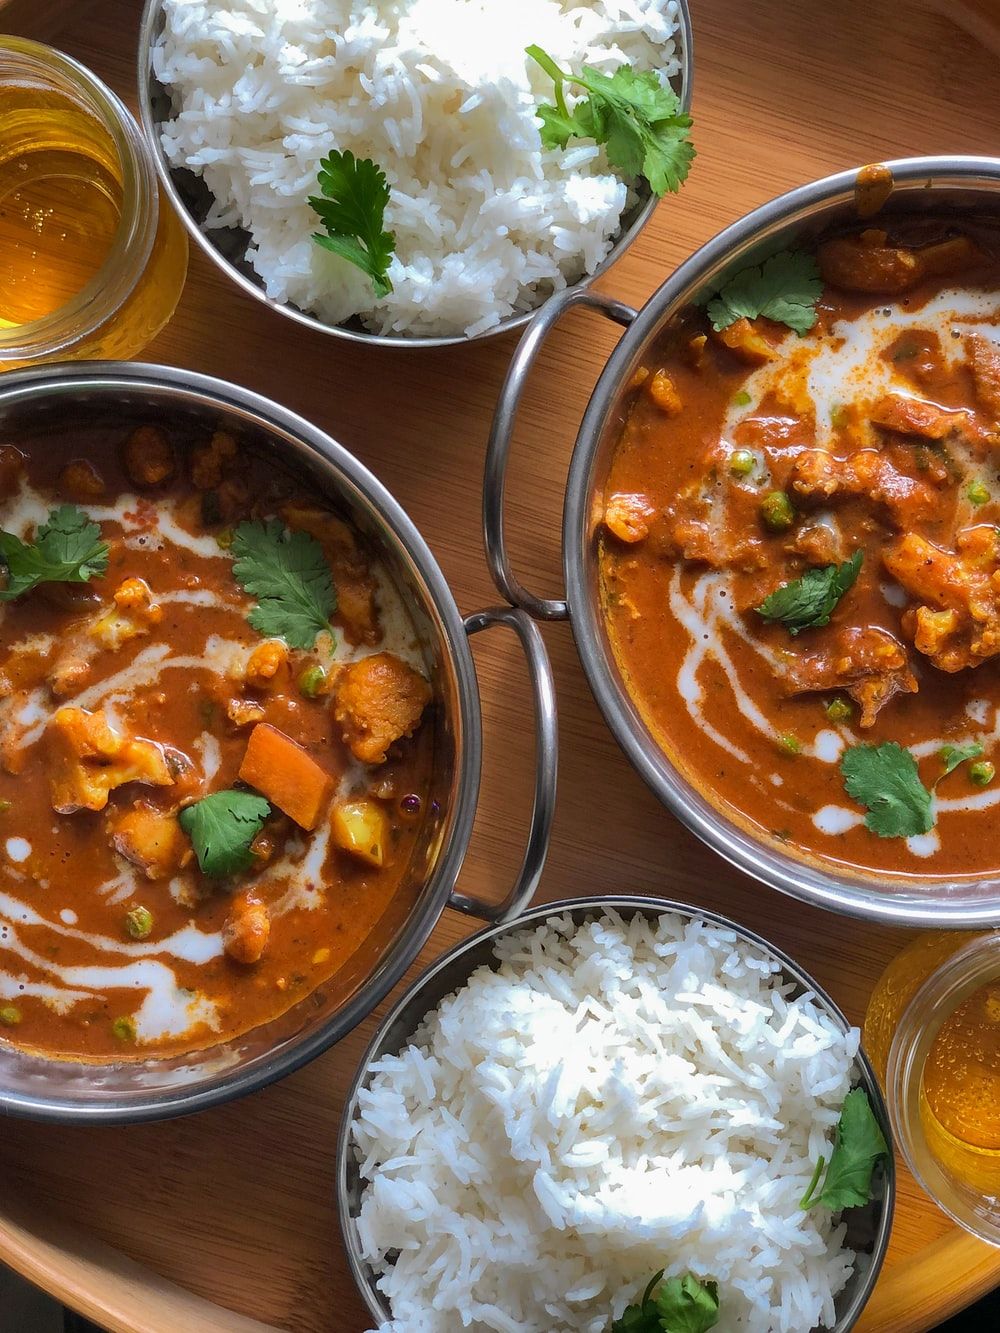 Curry Picture. Download Free Image